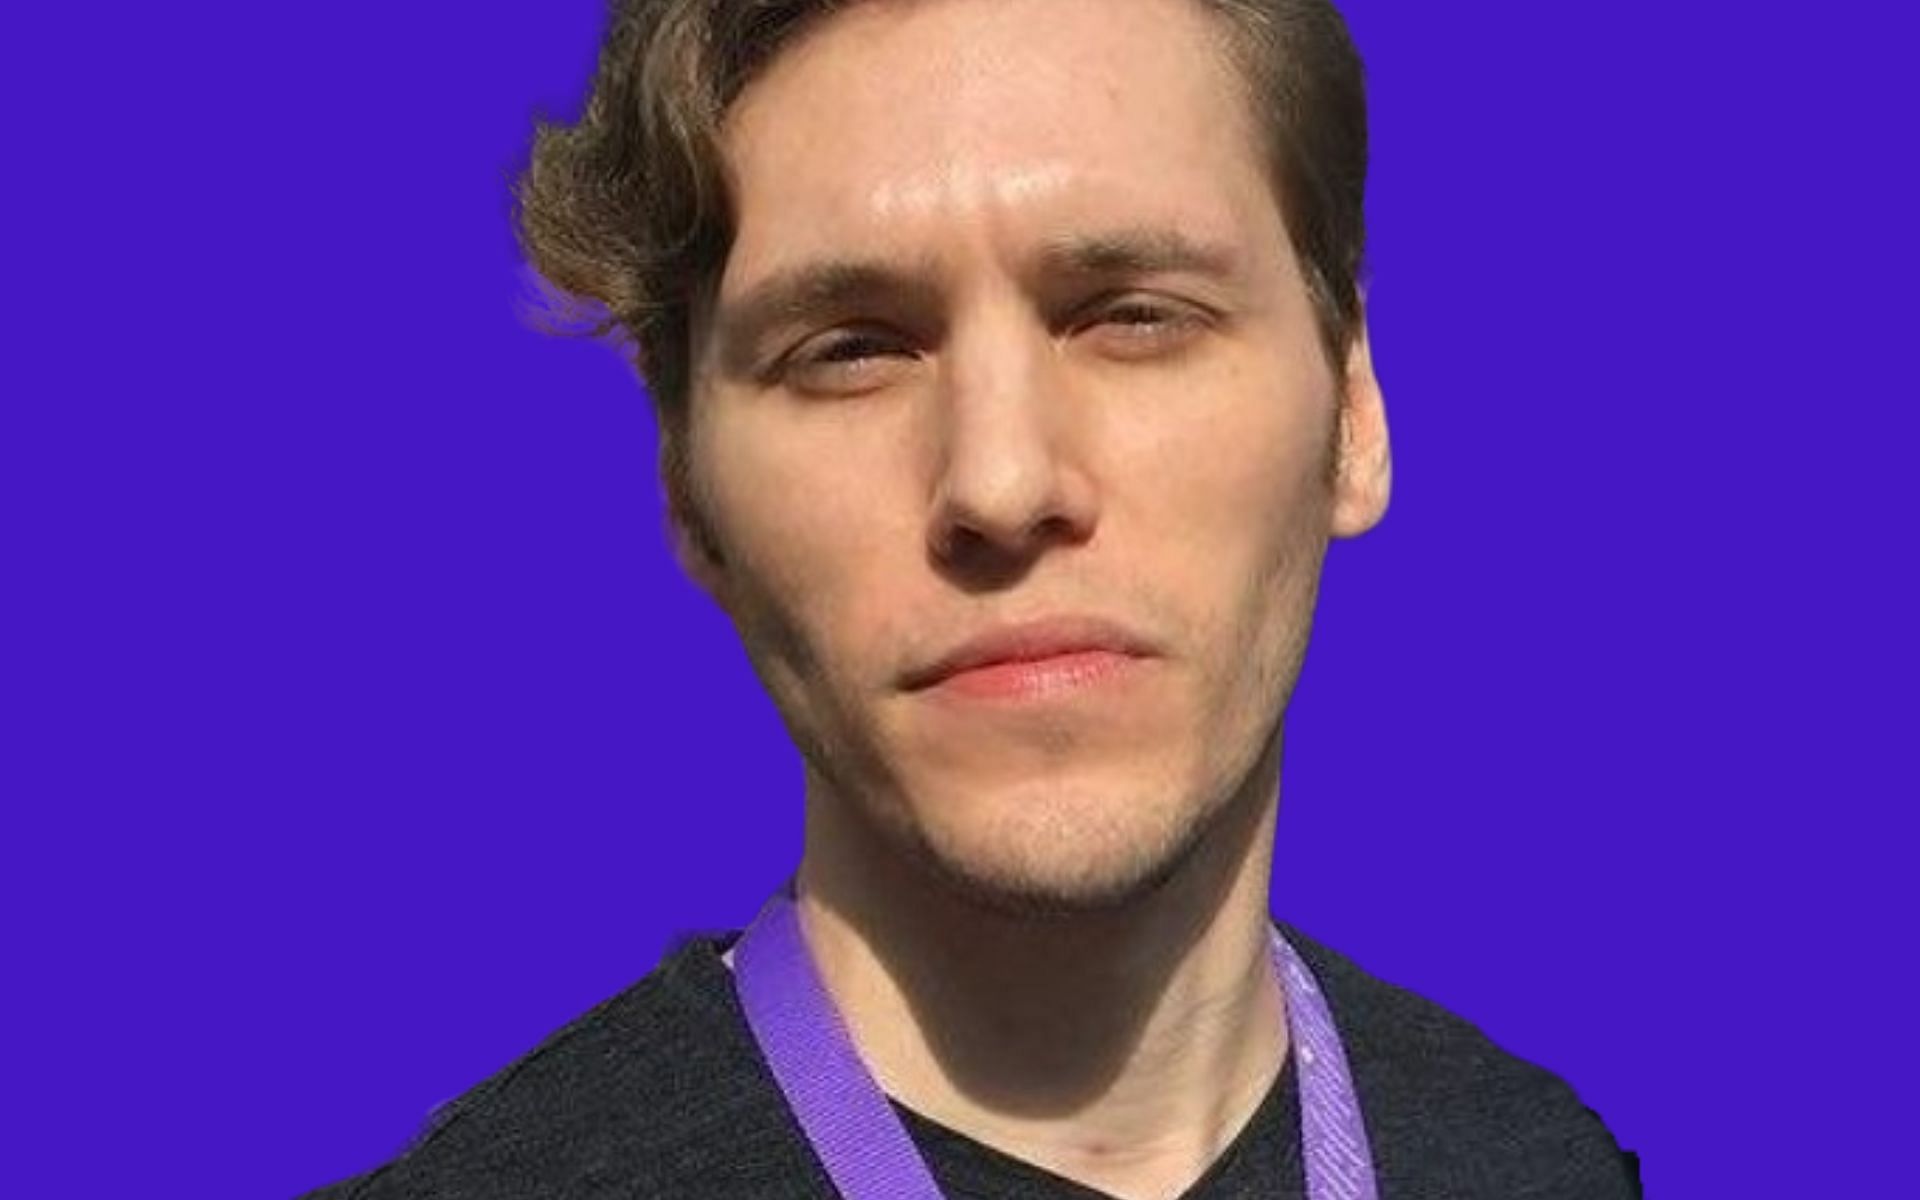 "It's overwhelming too" Twitch streamer Jerma985 provides his take on